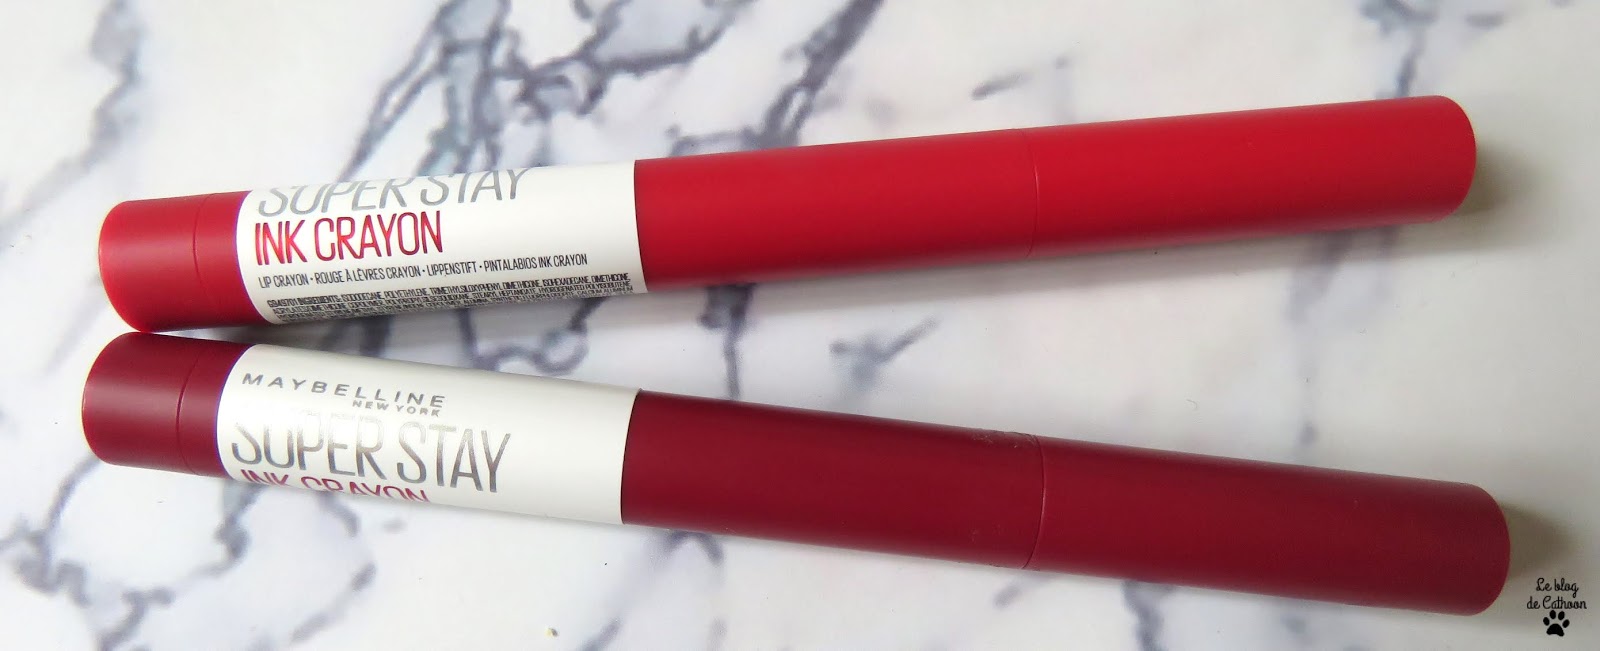 Superstay Ink Crayon Maybelline